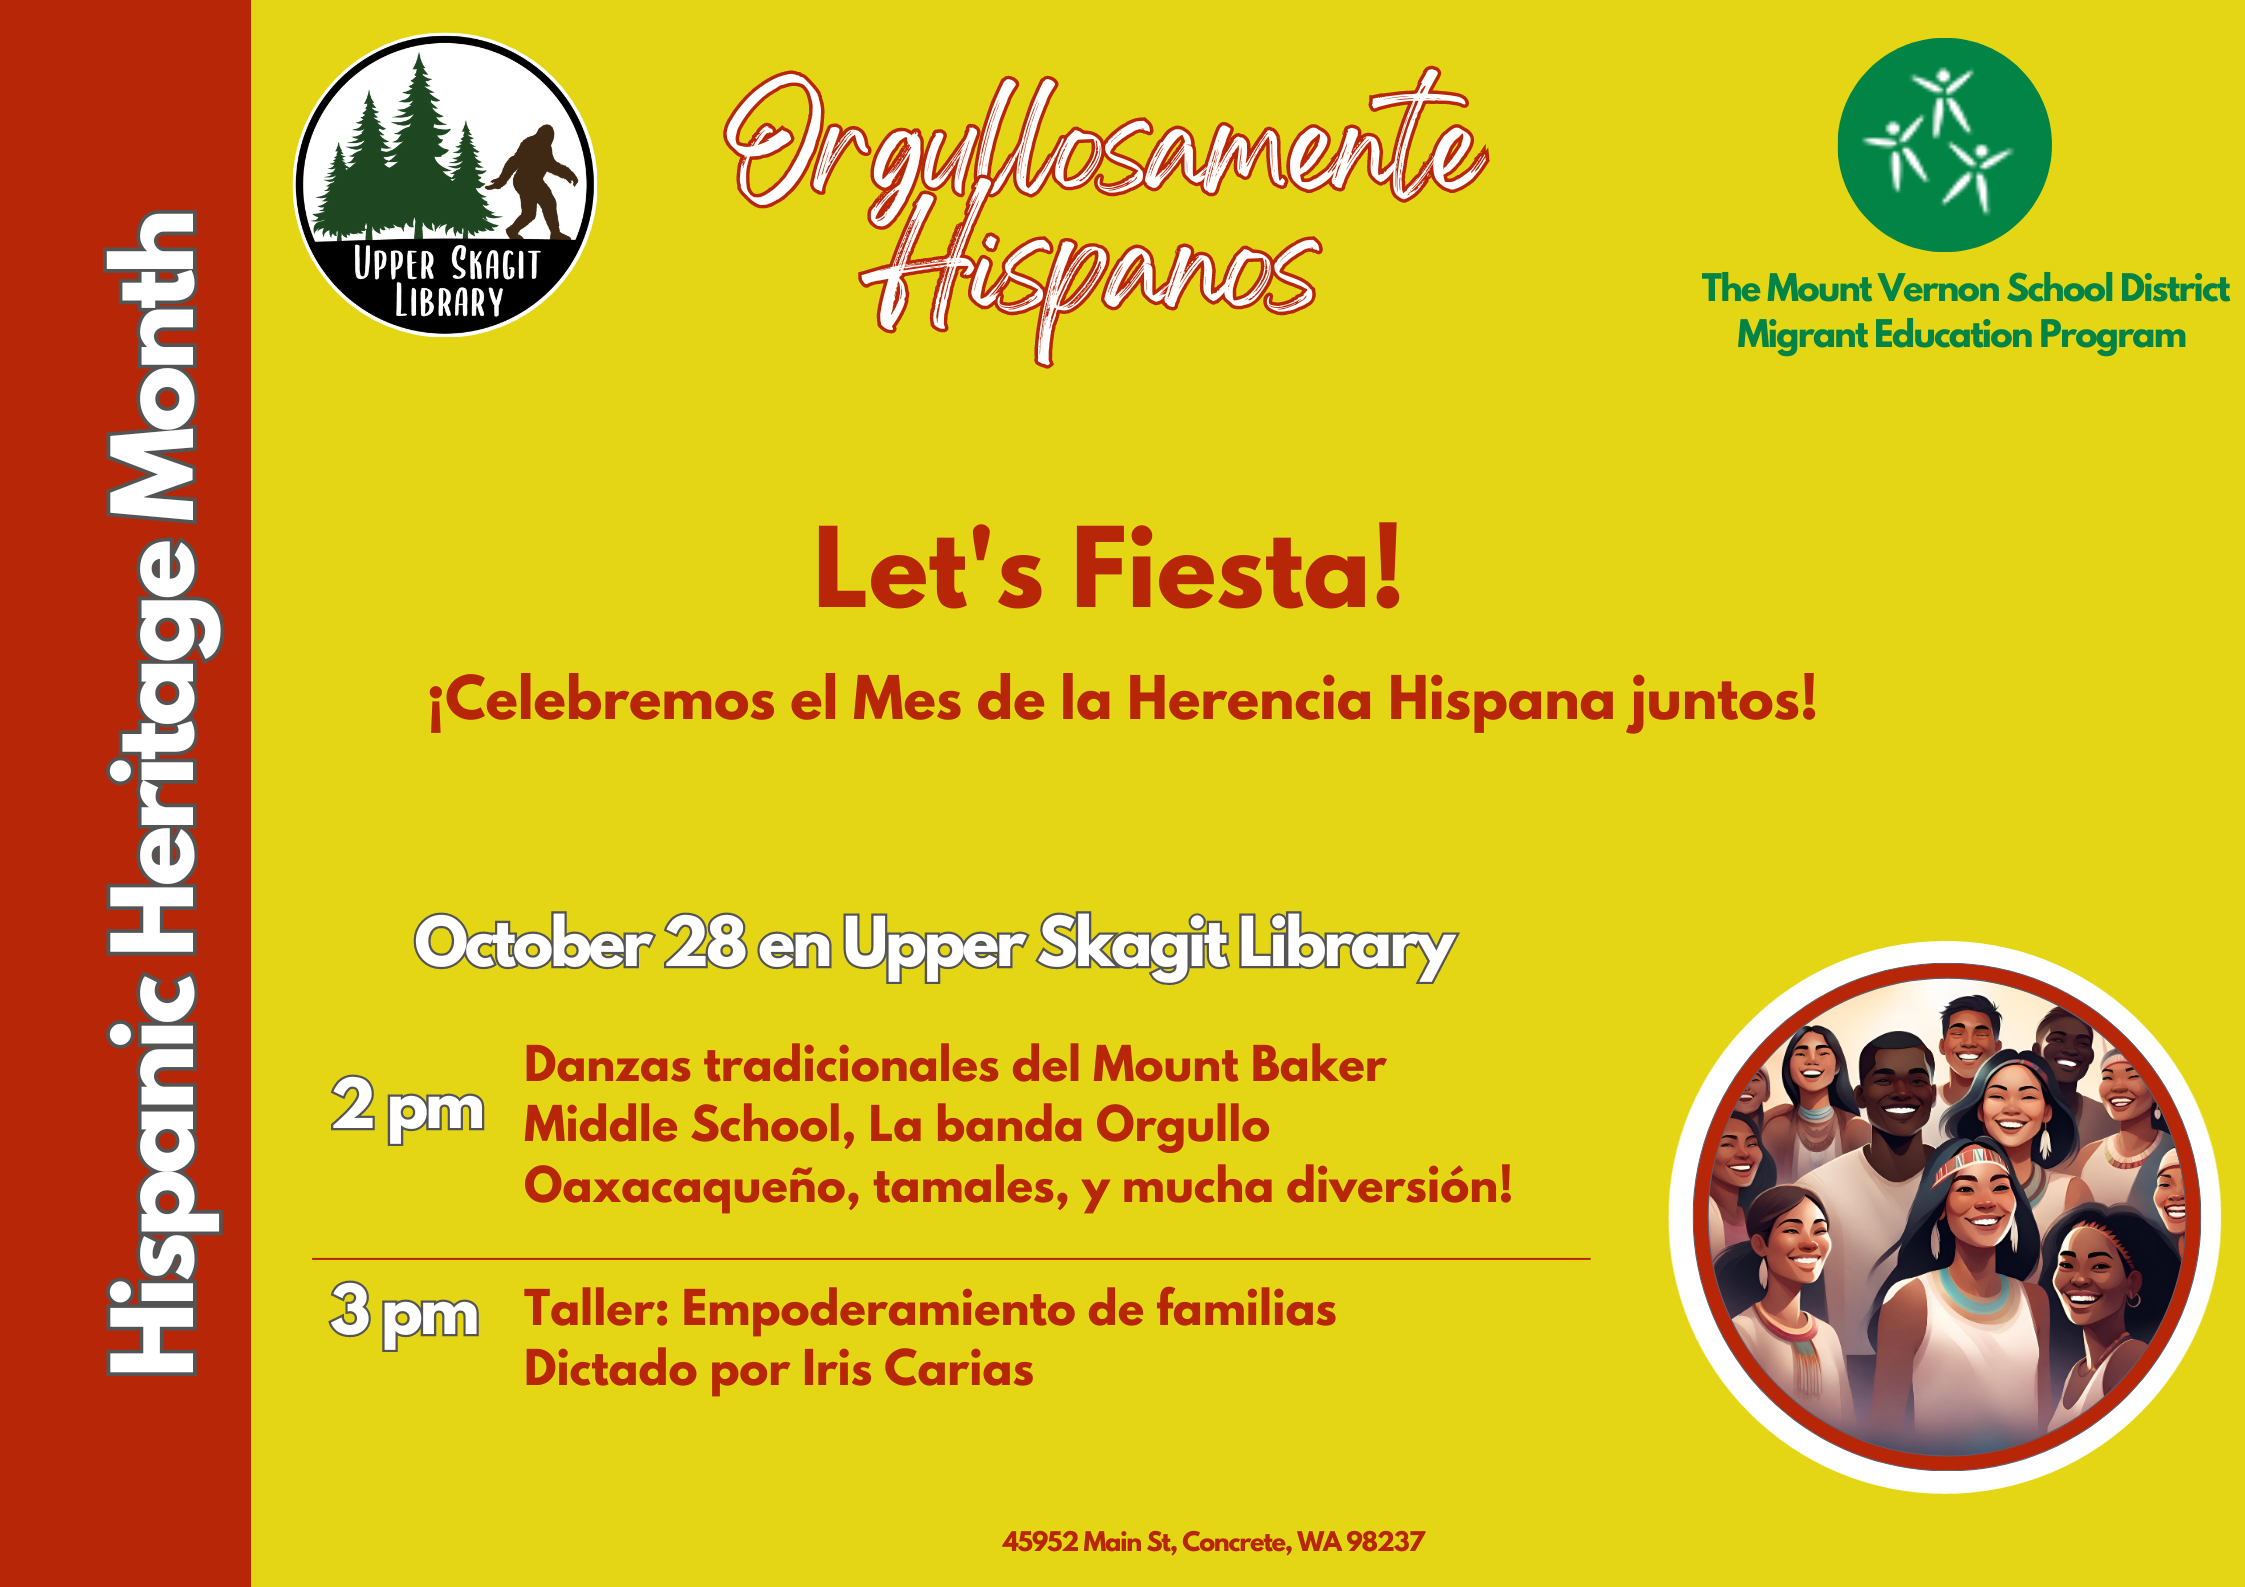 This is a image a flyer giving information about Hispanic Heritage Month.